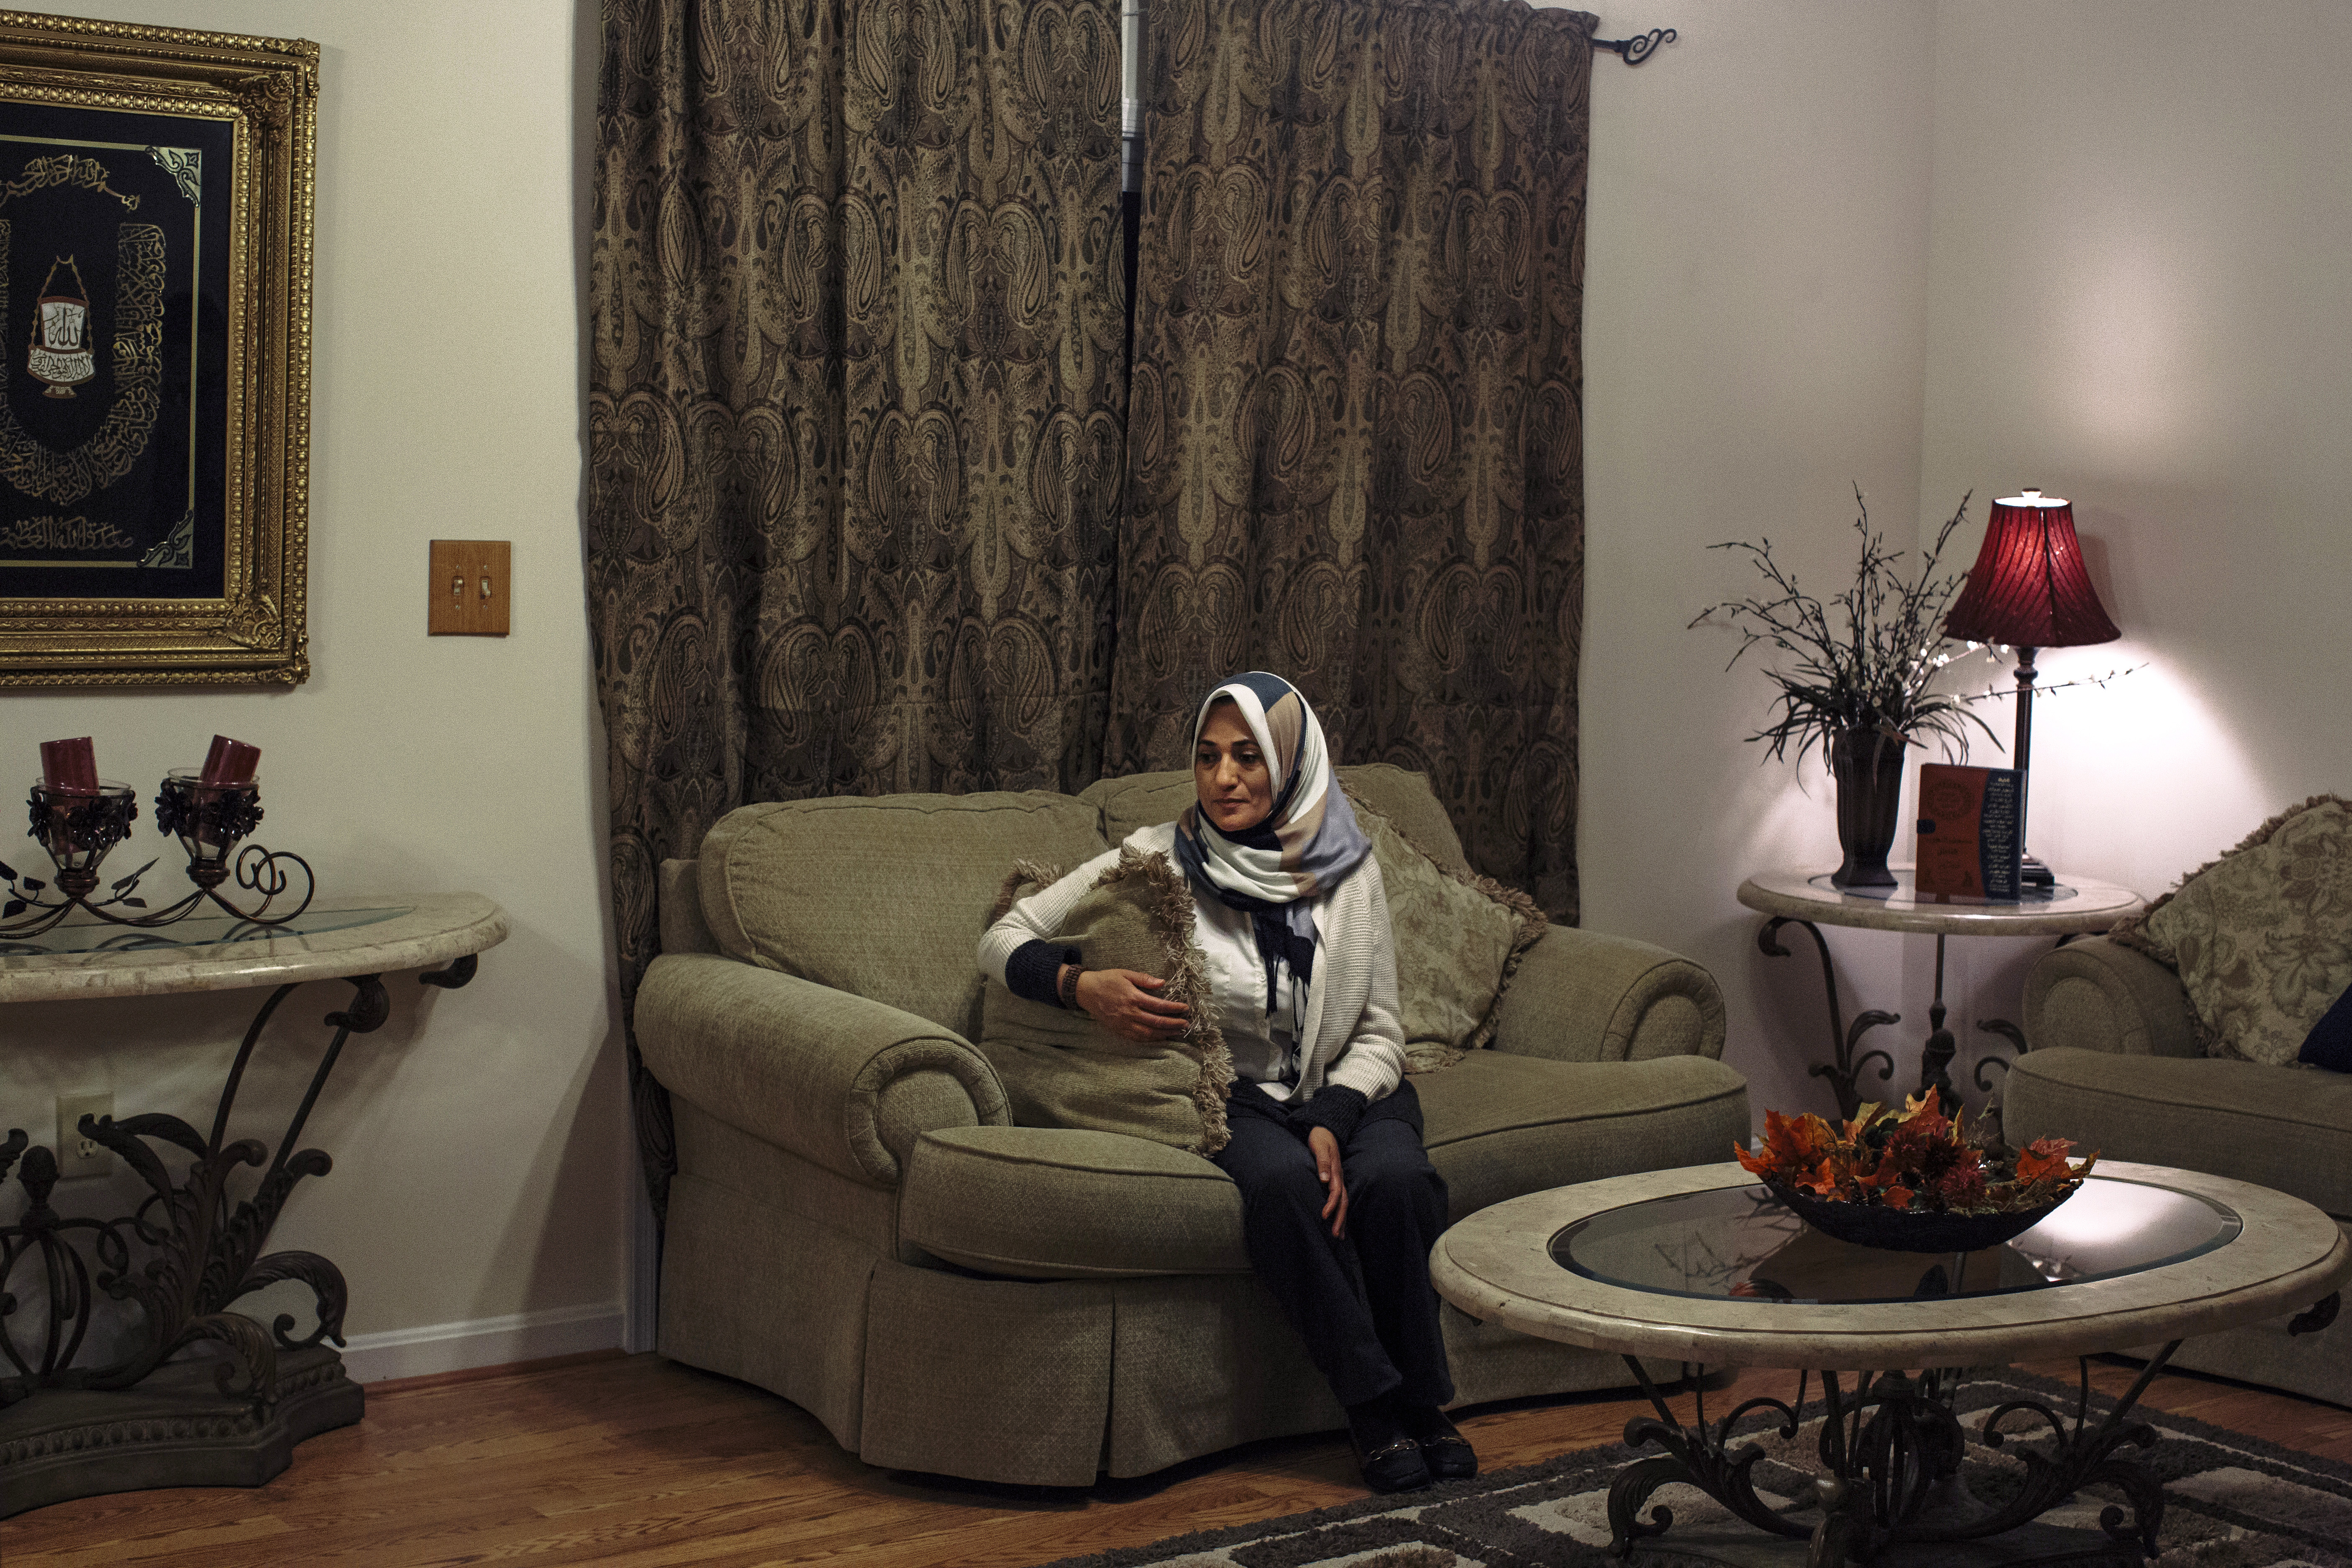 Sanaa Soliman sits in the living room of her home in Fredericksburg, Va. on Dec. 19, 2015. Sara and Mohamed Shanab are afraid for their mother, who wears a hijab. Sara bought her mother pepper spray. “I see my mother. Everyone else sees a terrorist,” Mohamed says.